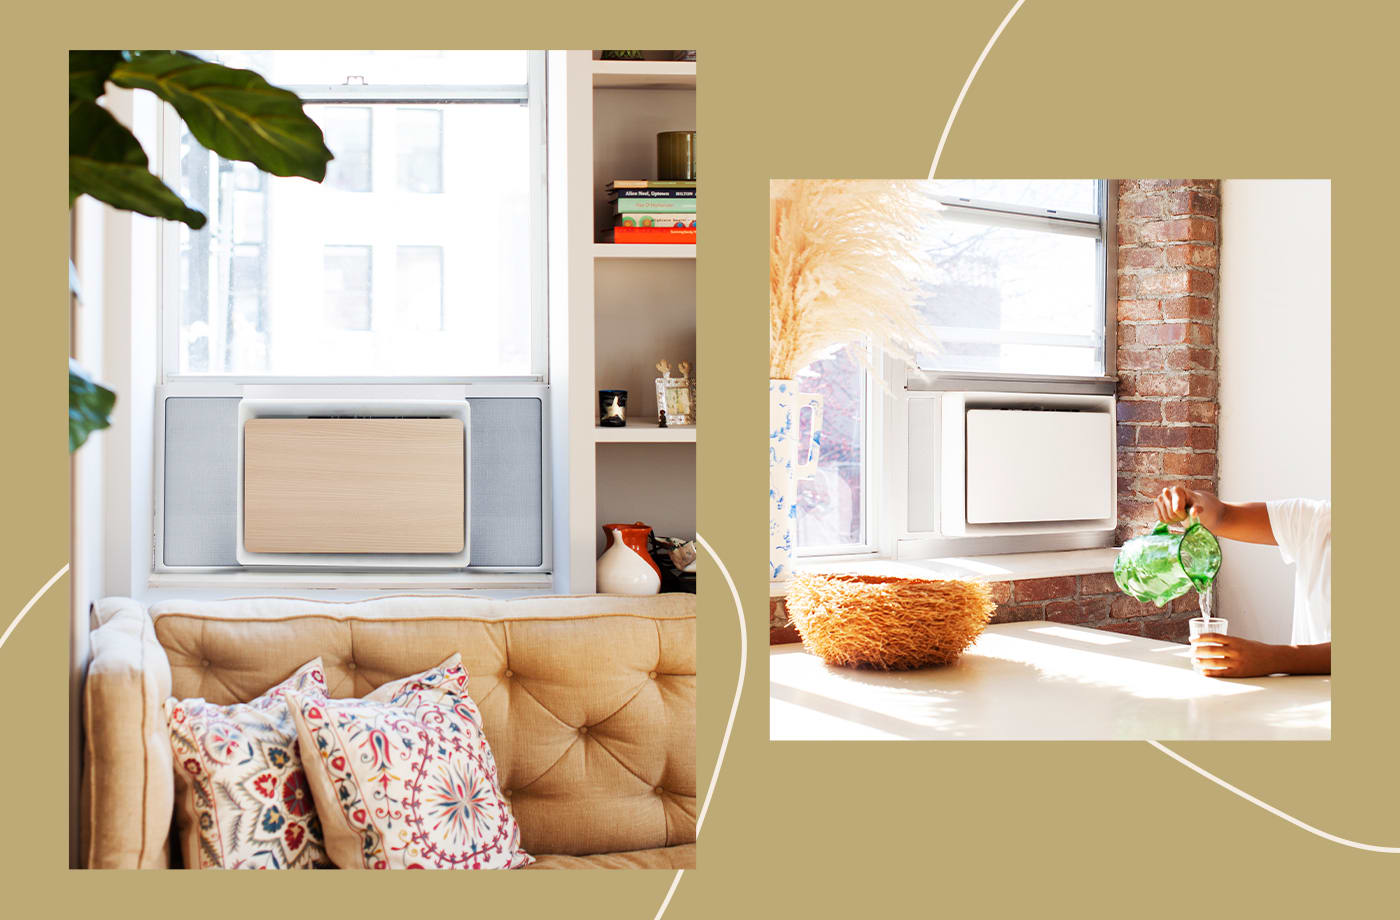 5 Aesthetically Pleasing Window Air Conditioners That Get the Job Done and Look Good Doing It